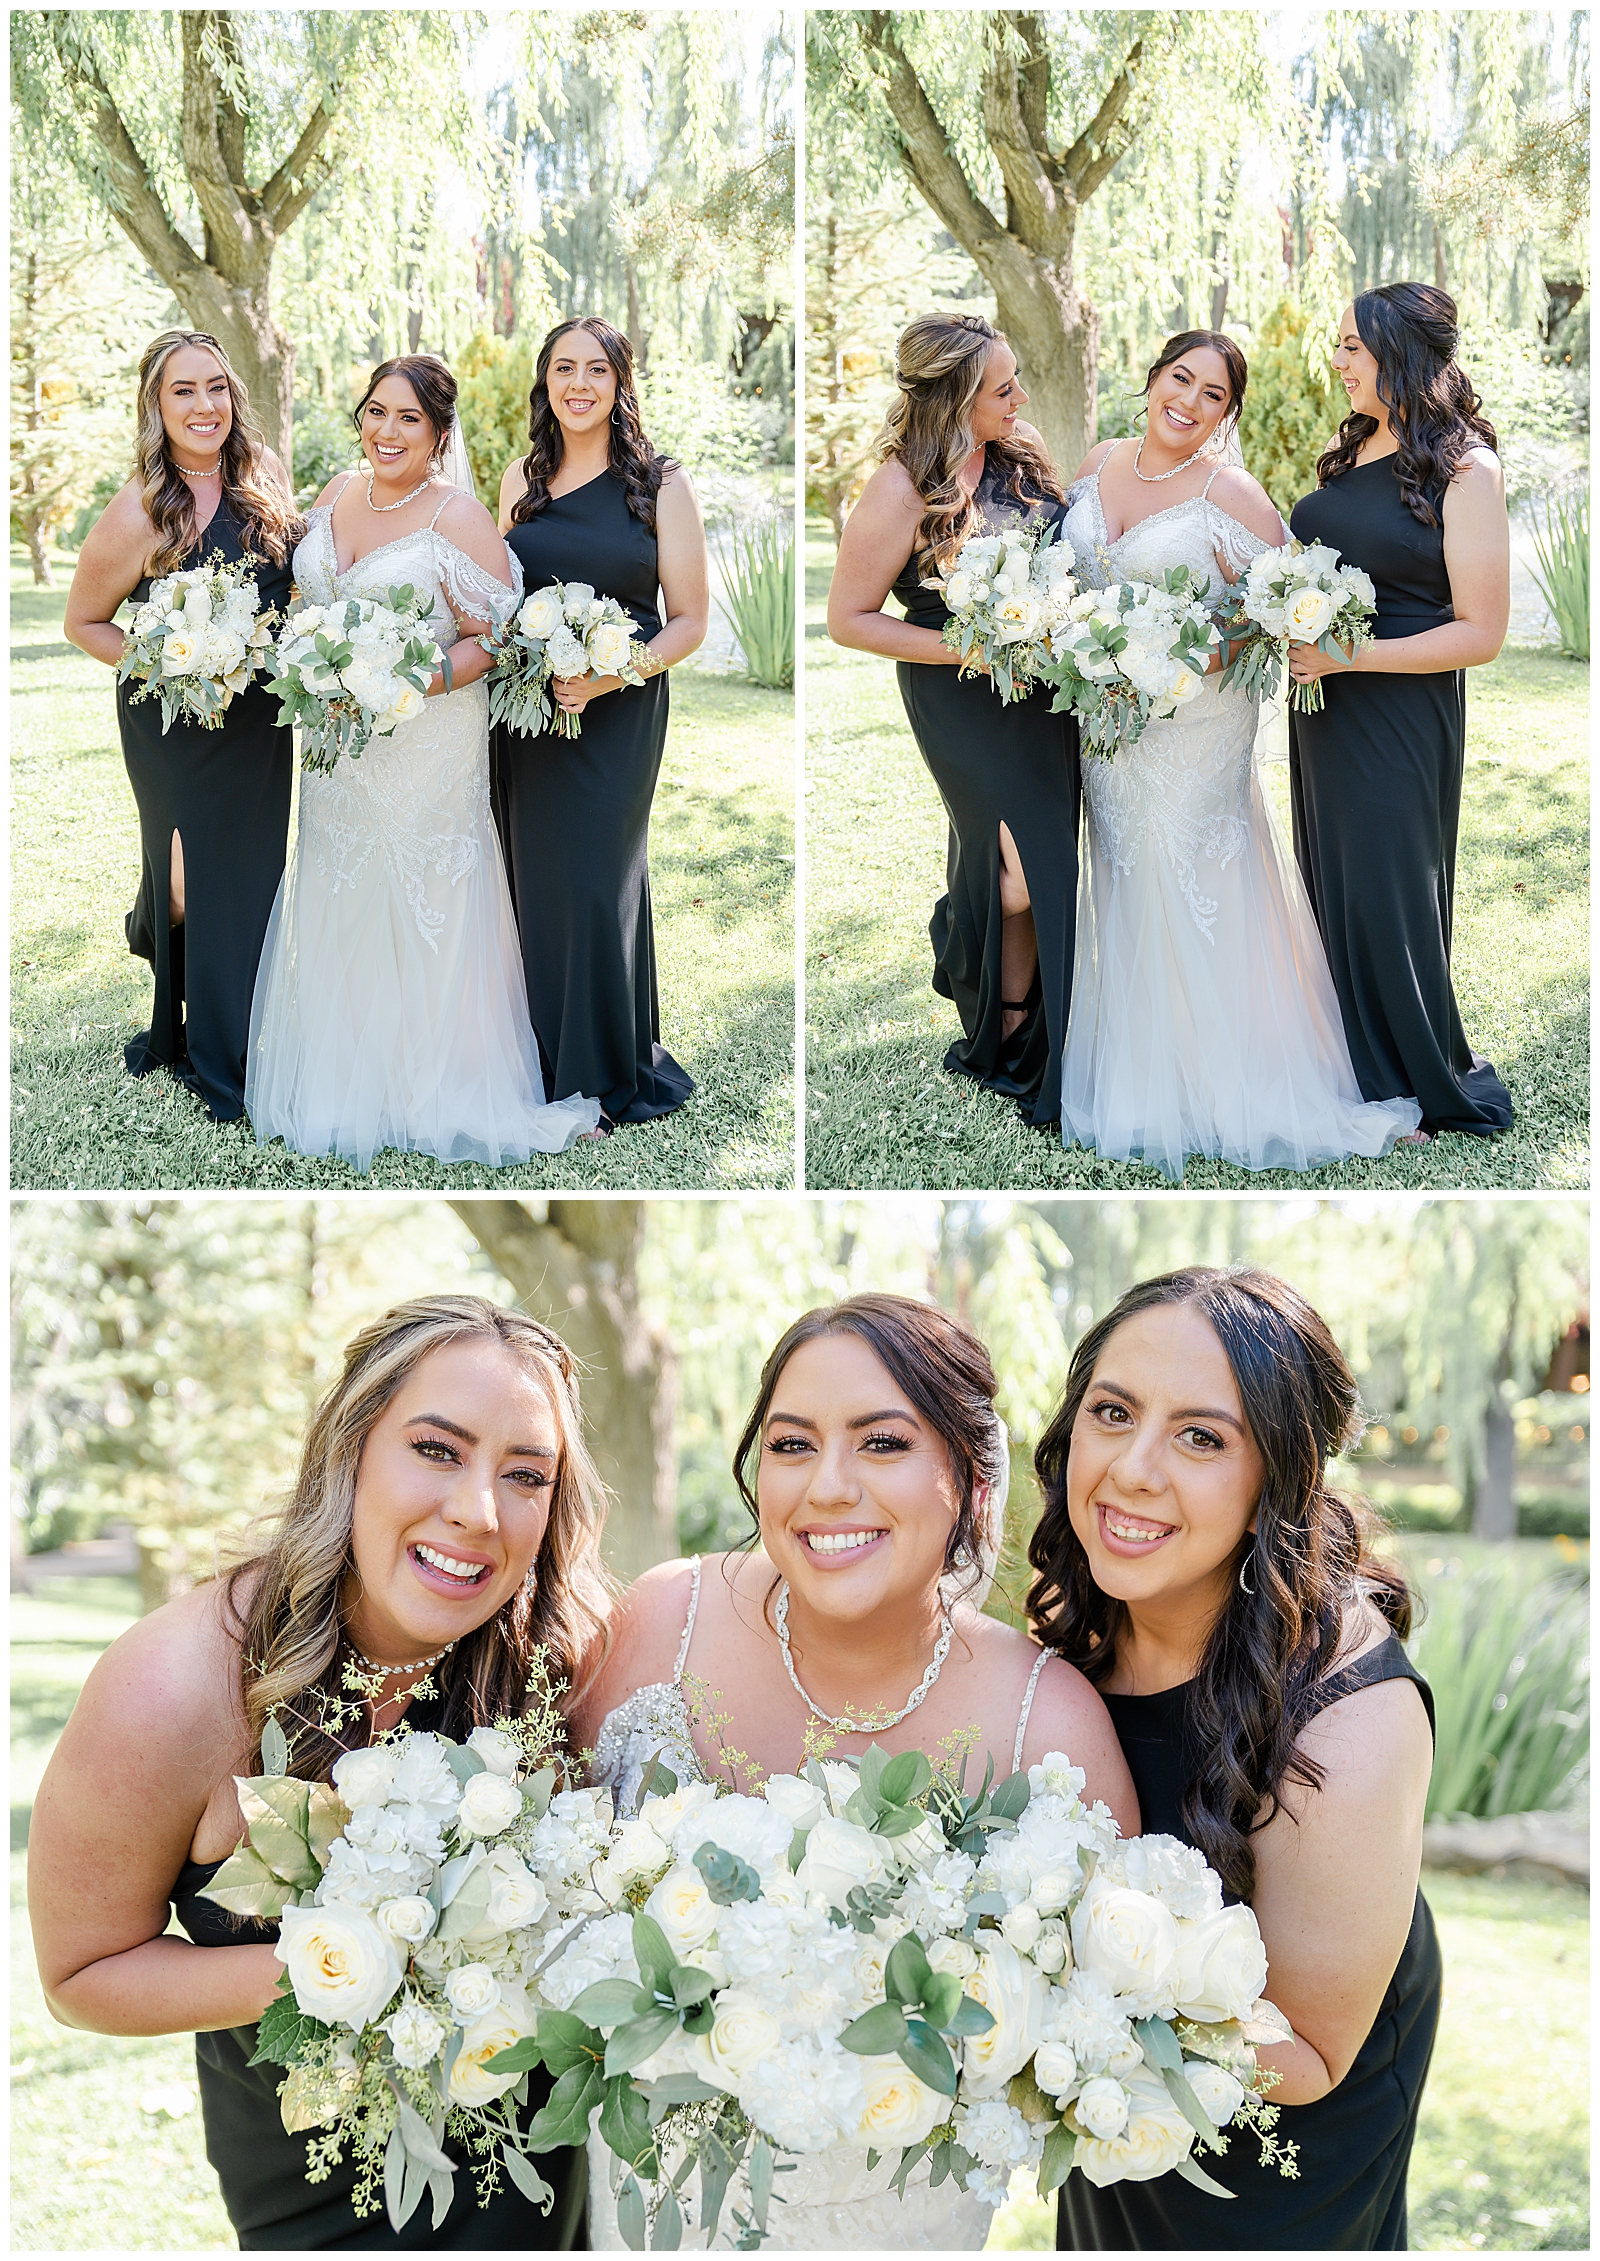 girls in black dresses standing next to bride in white dress